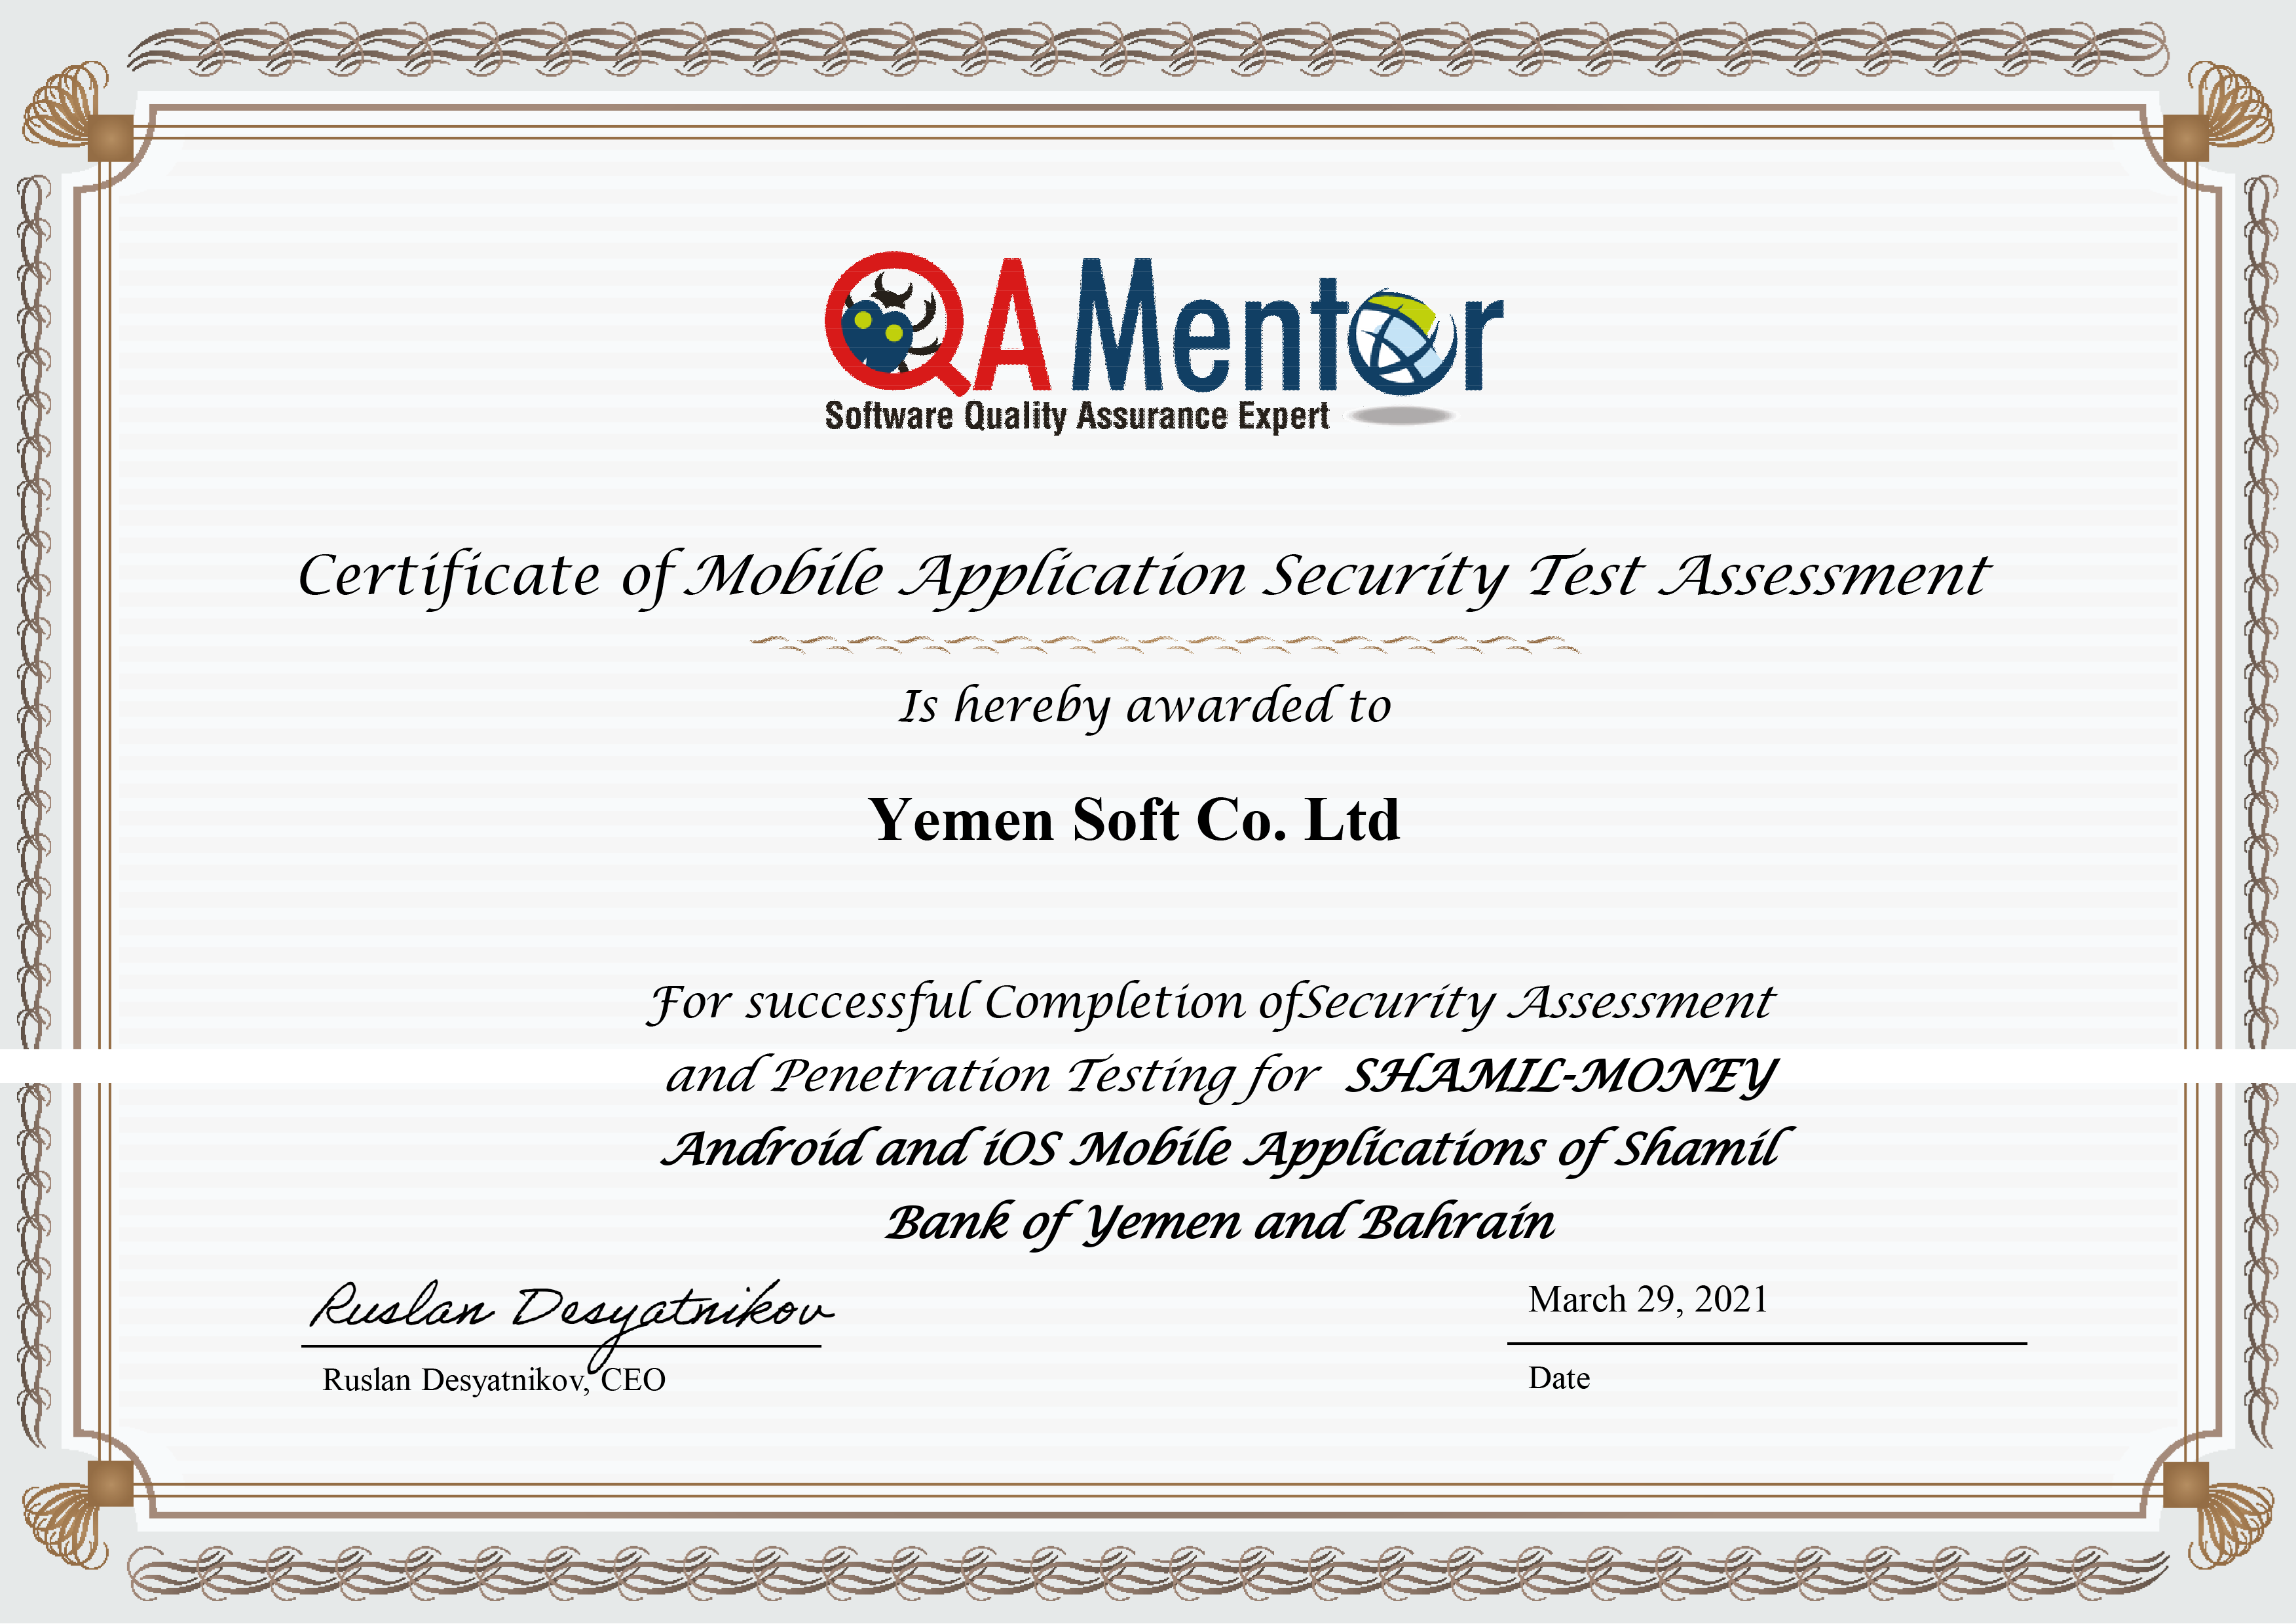 Yemen Soft Was Awarded QA Certification For The Security And Confidentiality Of Its Mobile Applications Based On The Testing Done By QA Mentor For Ultimate E-Wallet In Shamil Bank Of Yemen And Bahrain